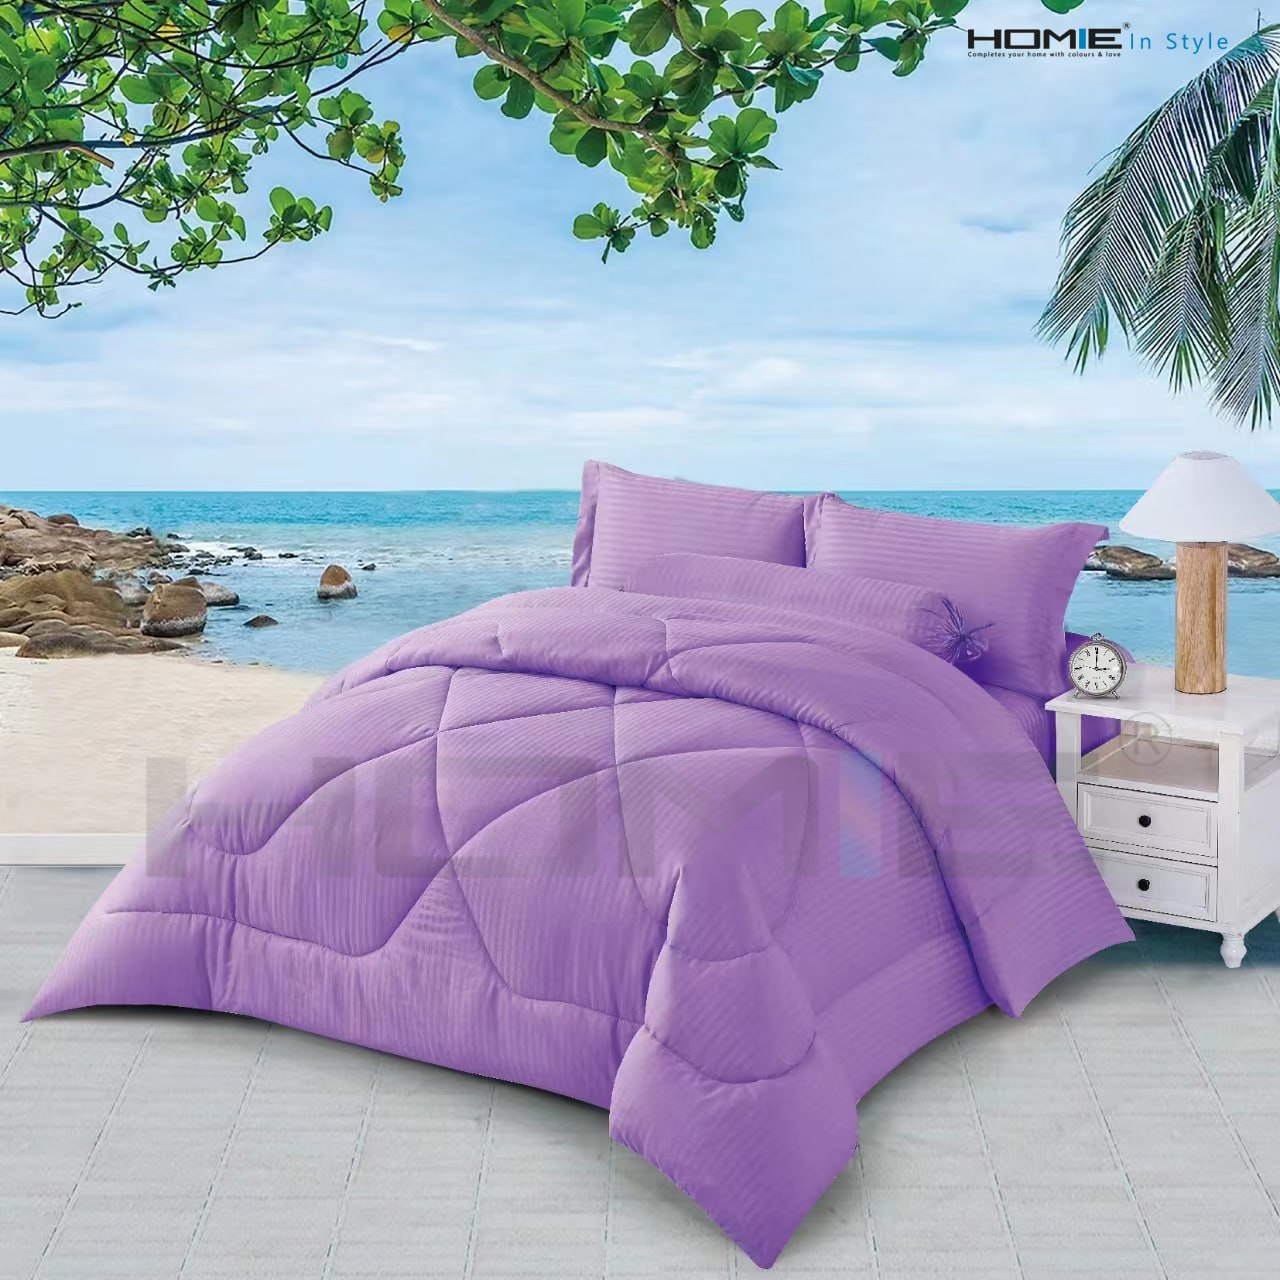 HOMIE In Style Bedding Set